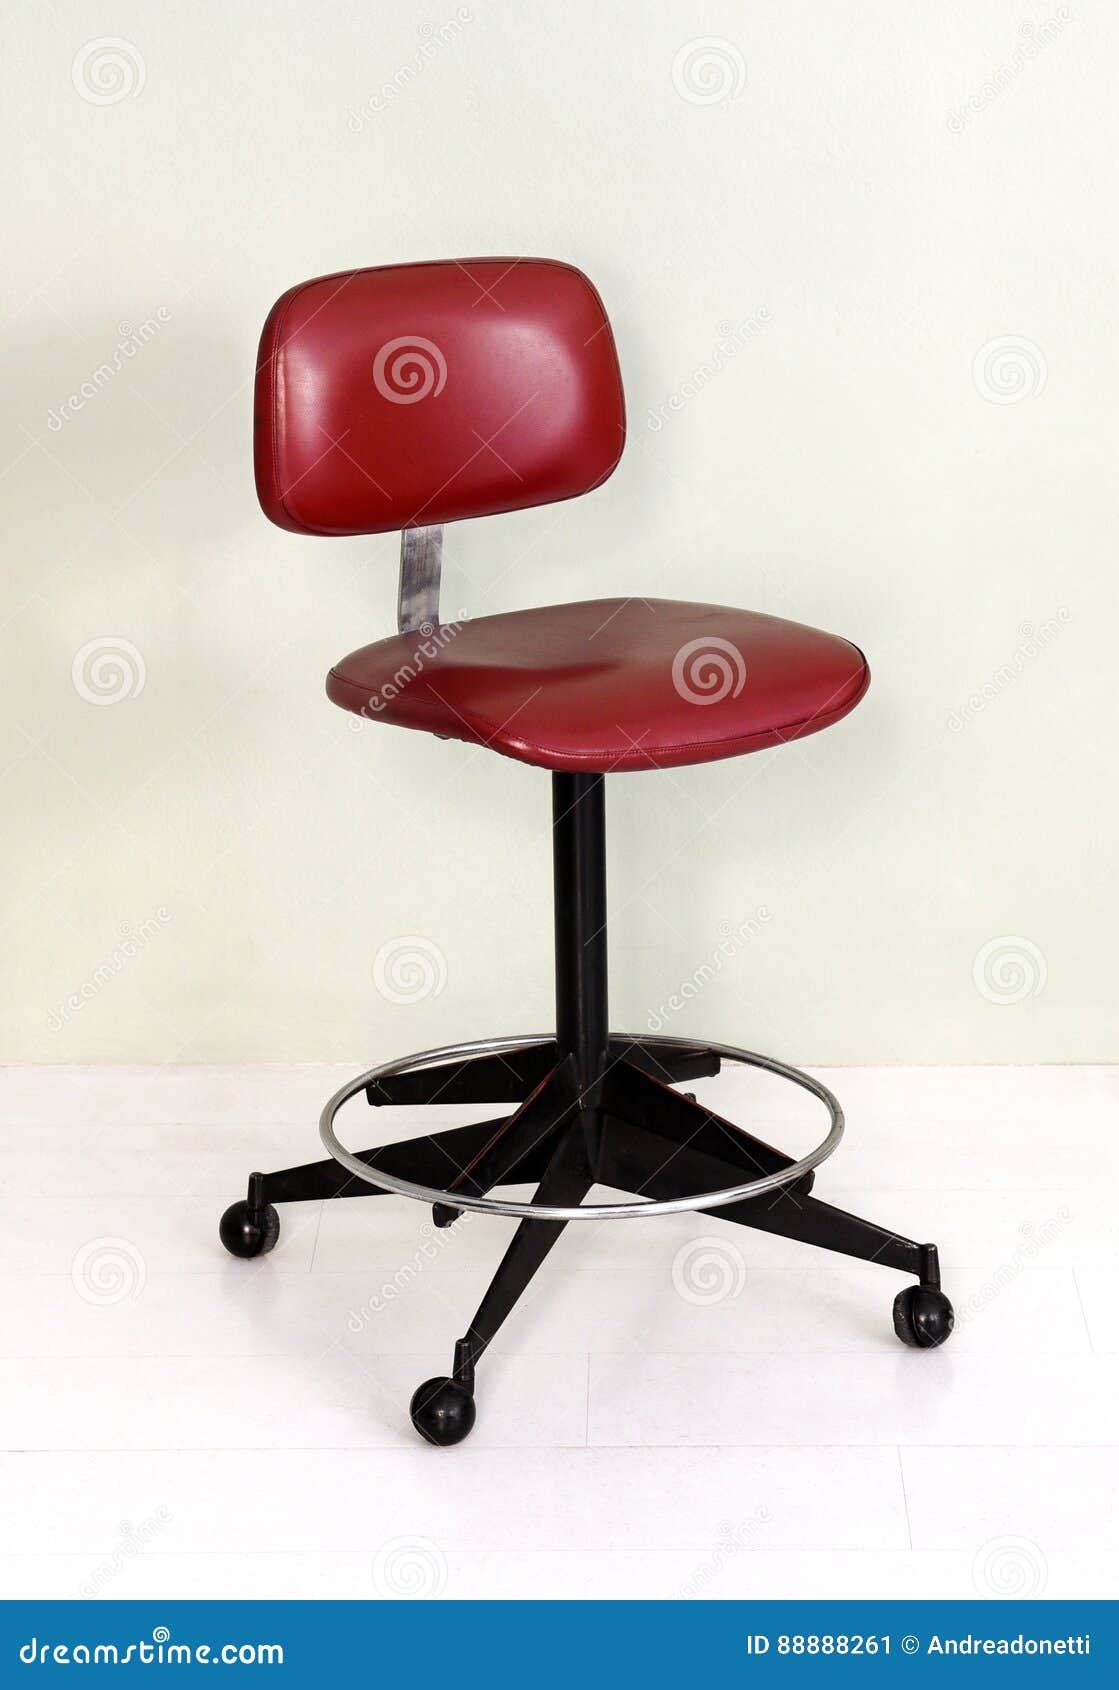 Retro Office Chair Red Seat Wheels Furniture Still Life Vintage Wheel Casters Room White Background Floor 88888261 